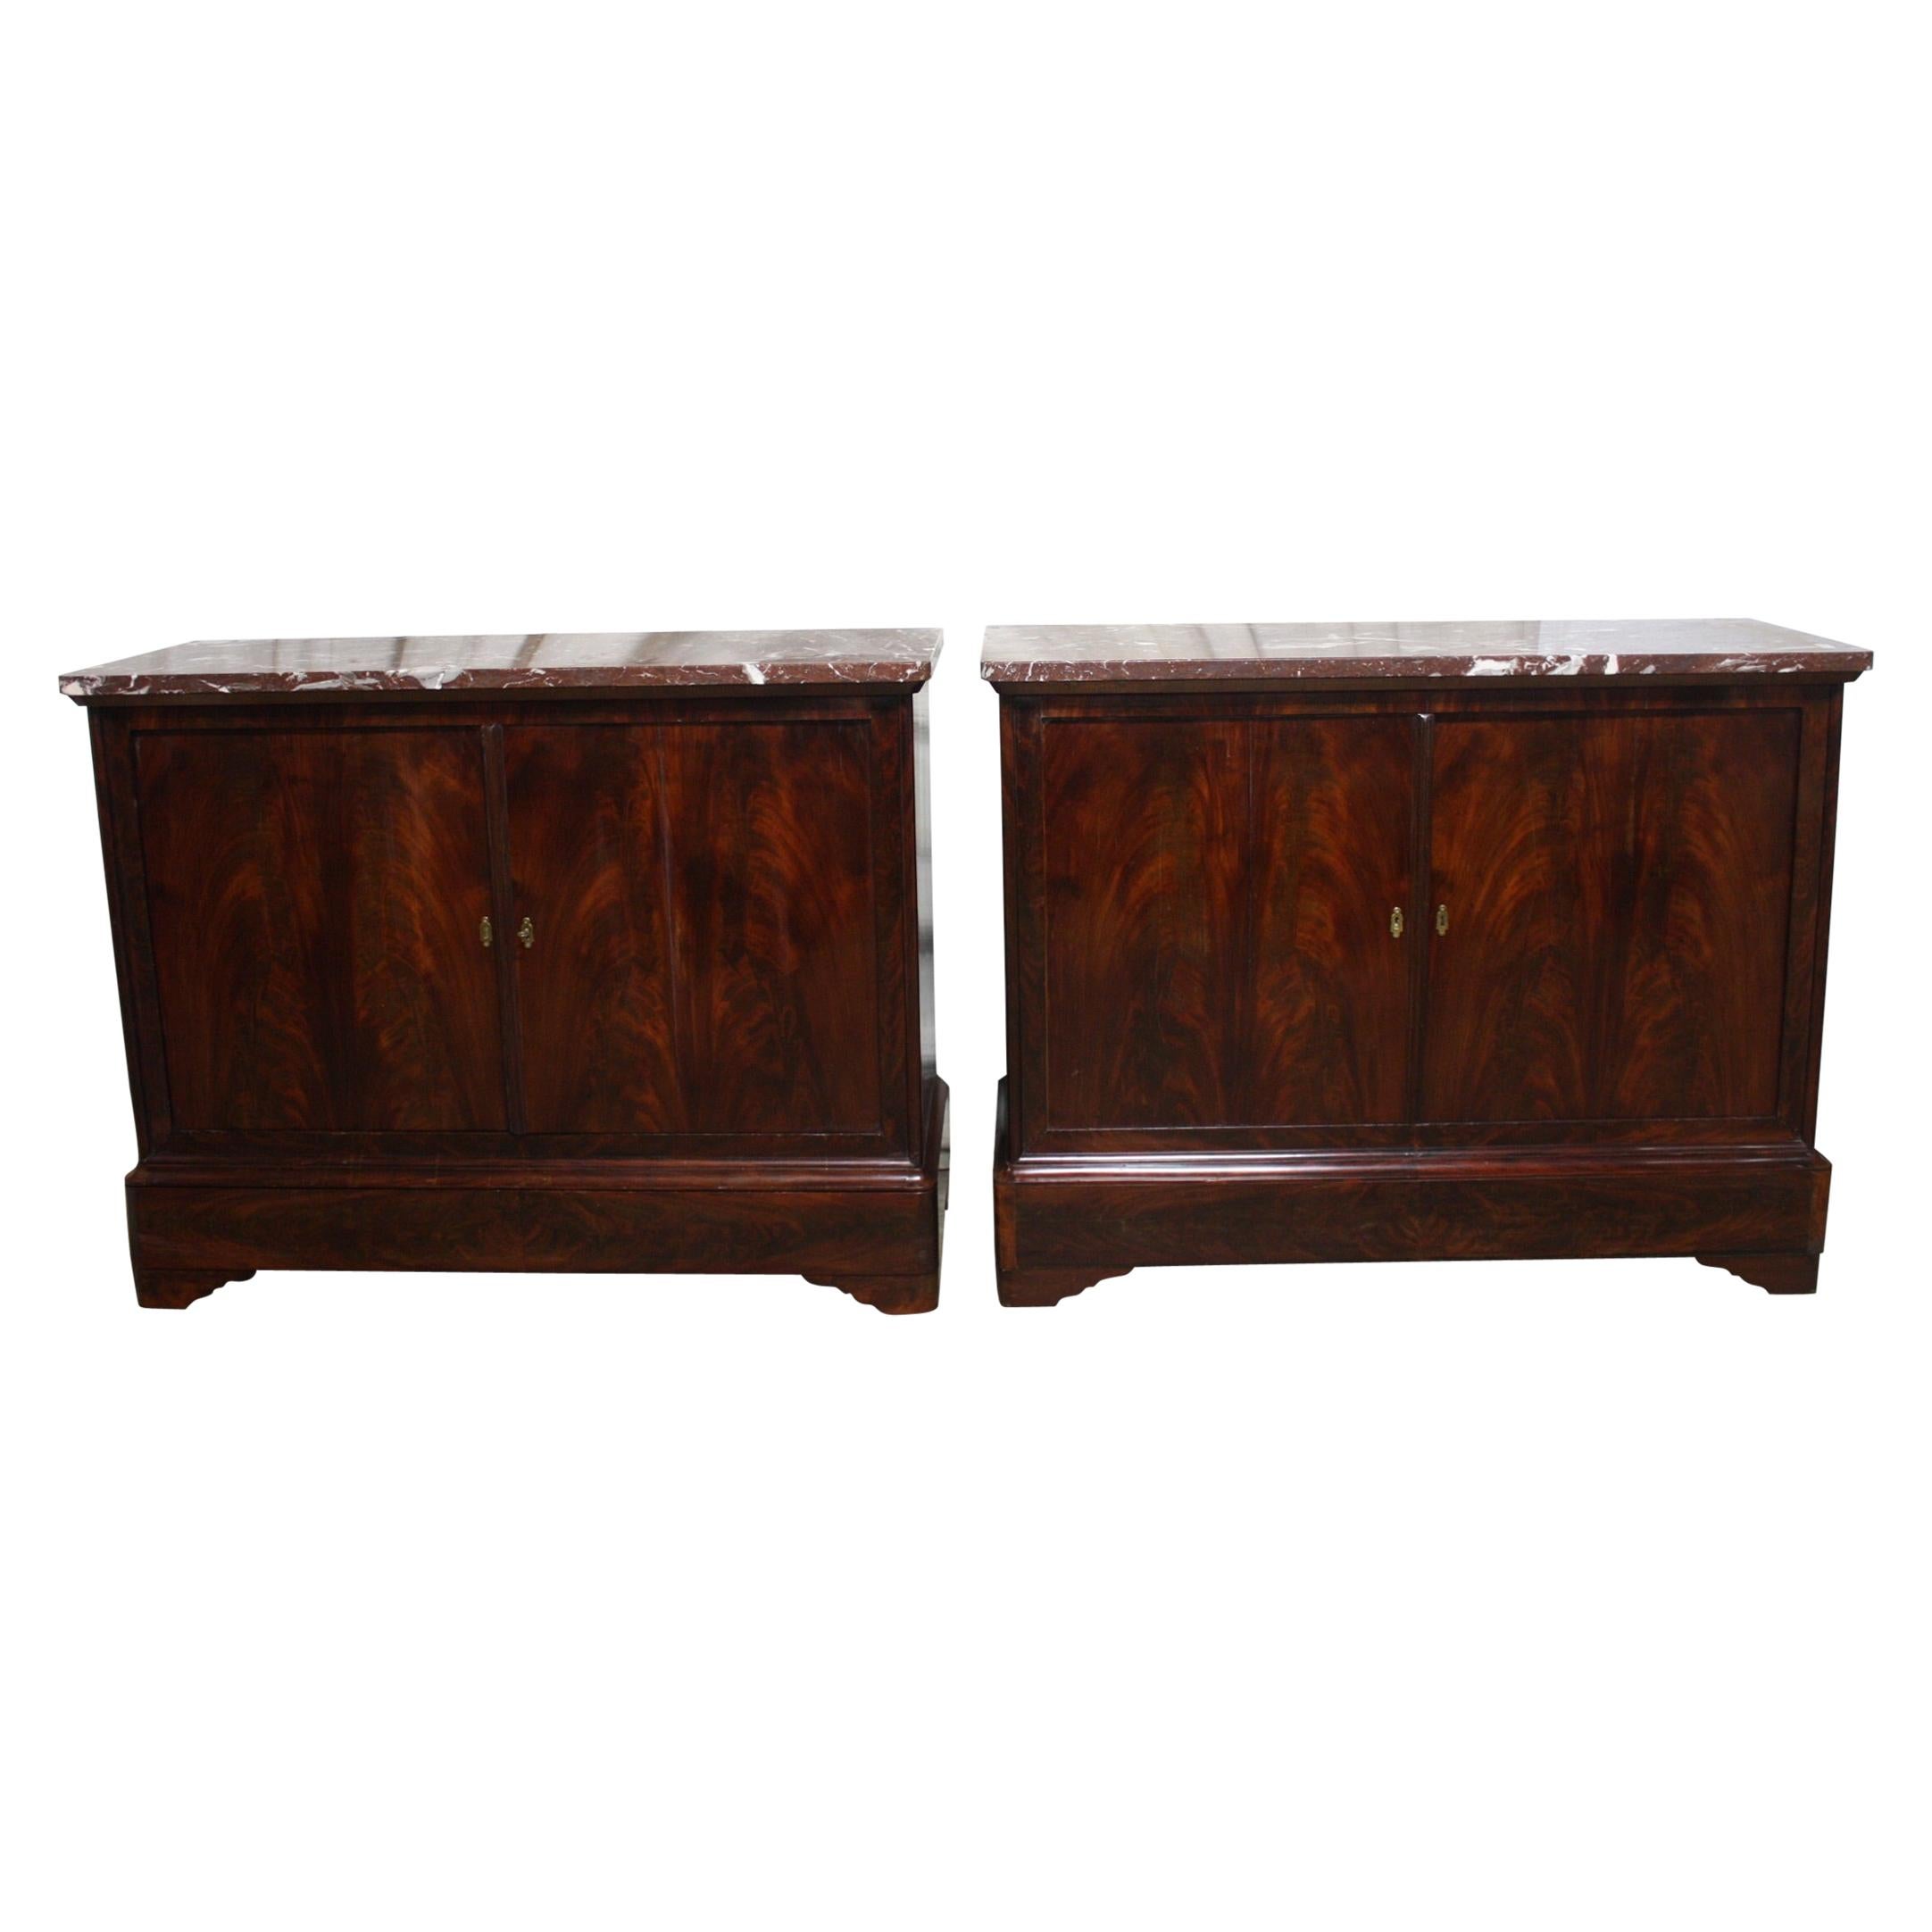 Superbe Pair of 19th Century French Buffet